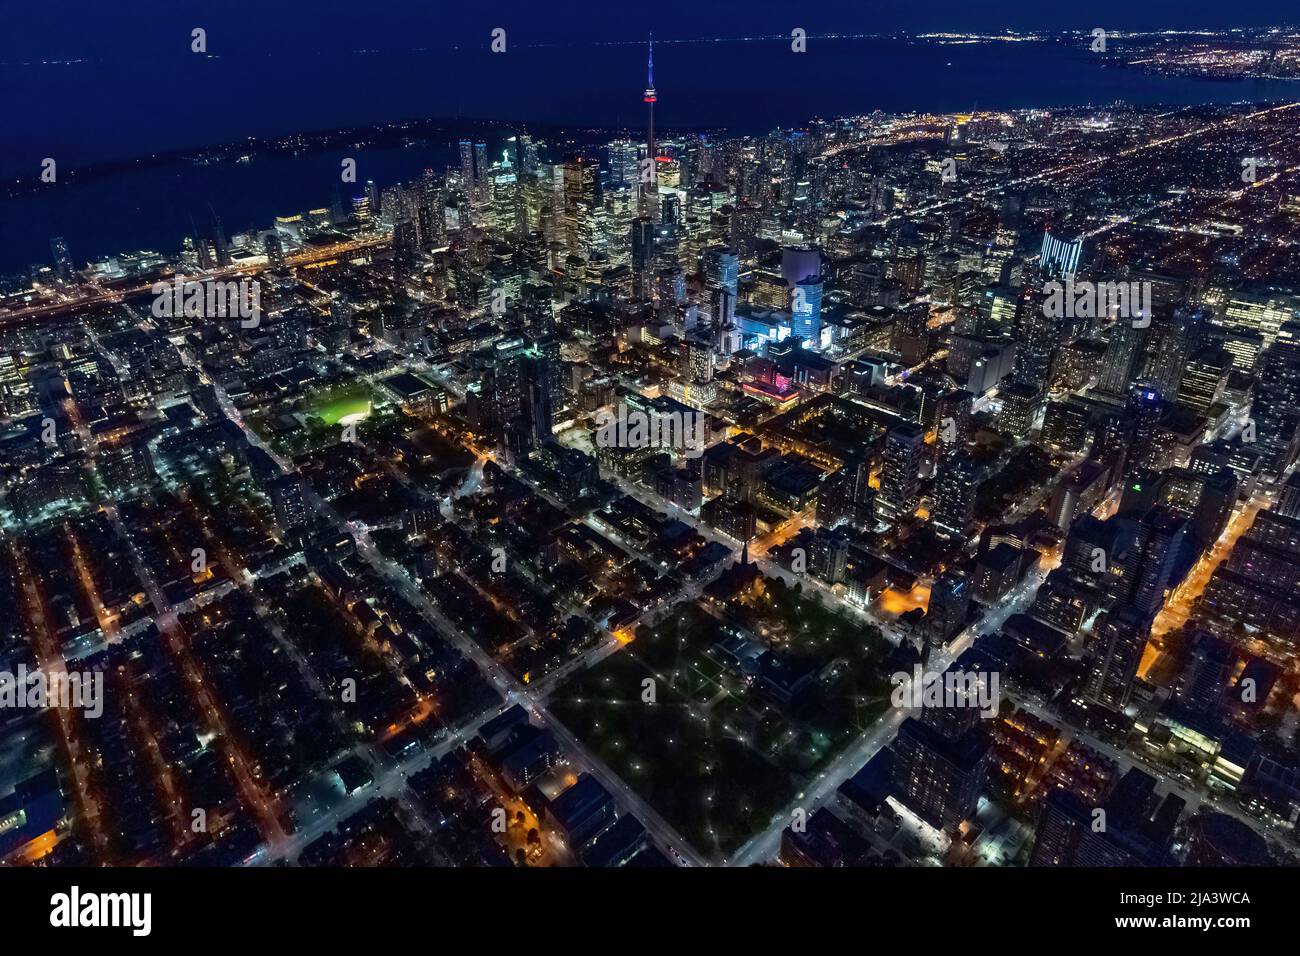 The North East of Toronto at night Stock Photo